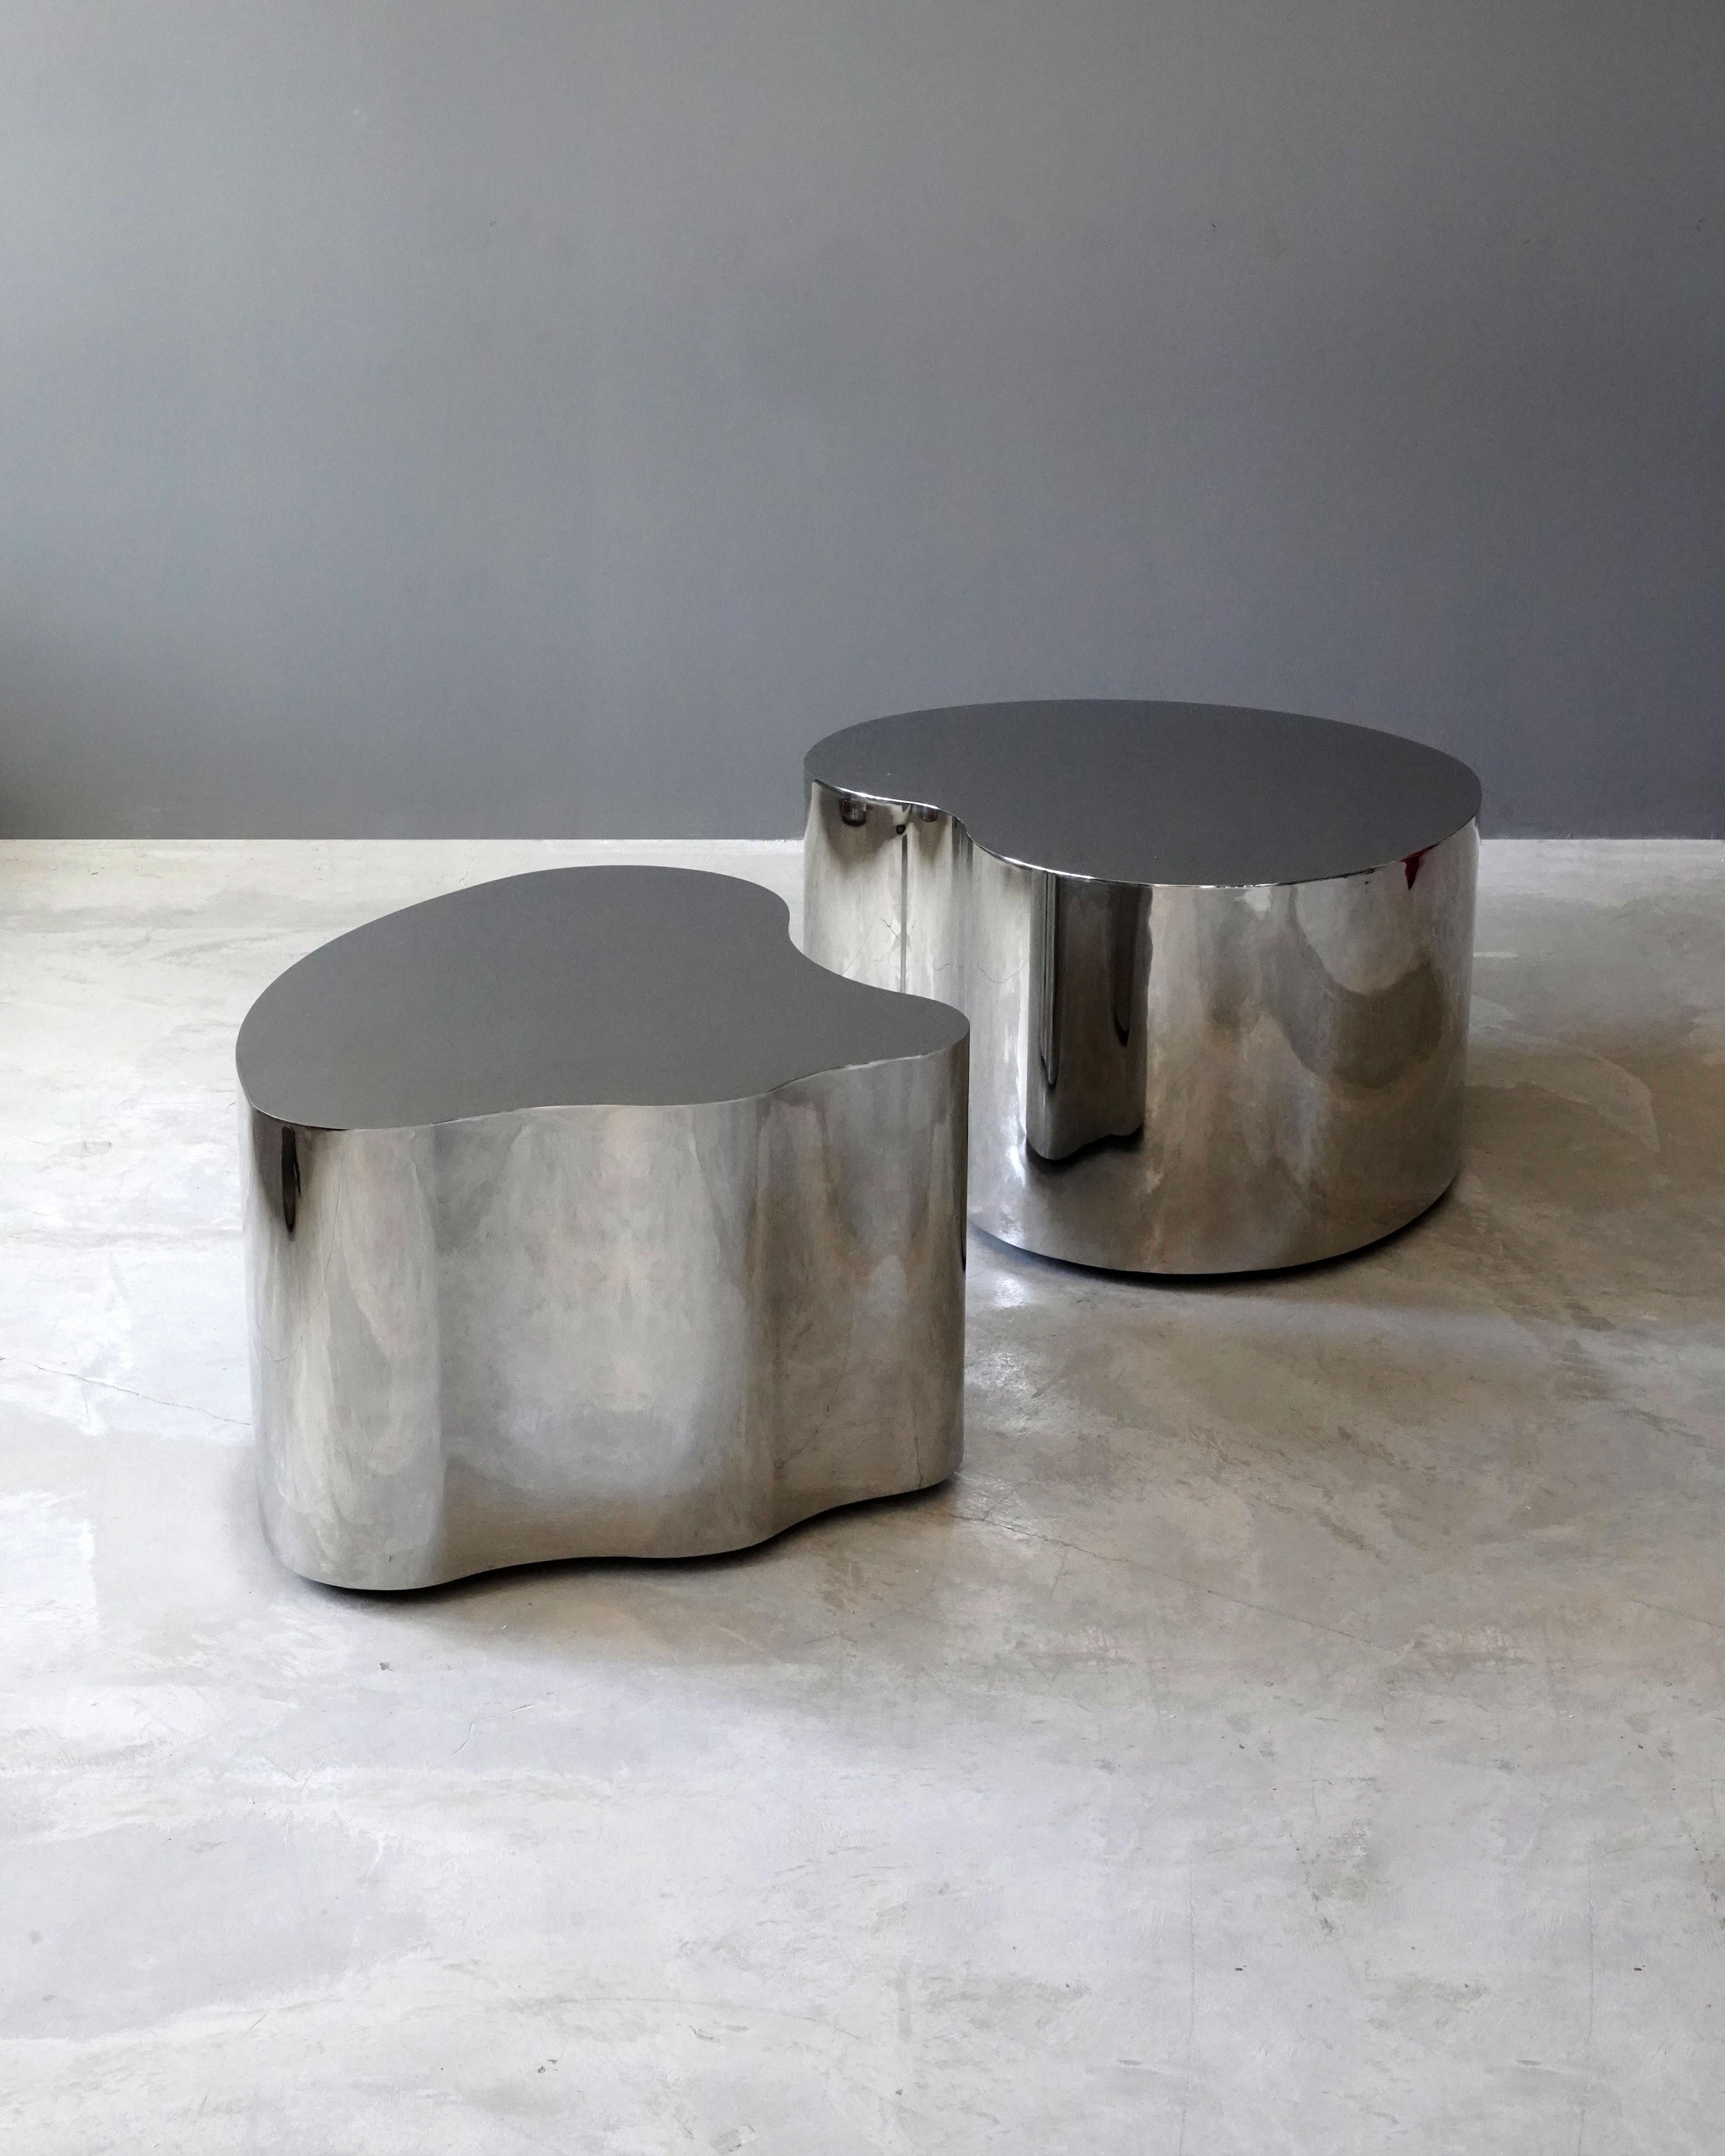 An set of two organic / biomorphic coffee tables. In polished stainless steel. Produced in artists studio, New York, America, 2000s. Signed.

Other designers working in the organic style include Vladimir Kagan, Karl Springer, Paul Evans, and T.H.